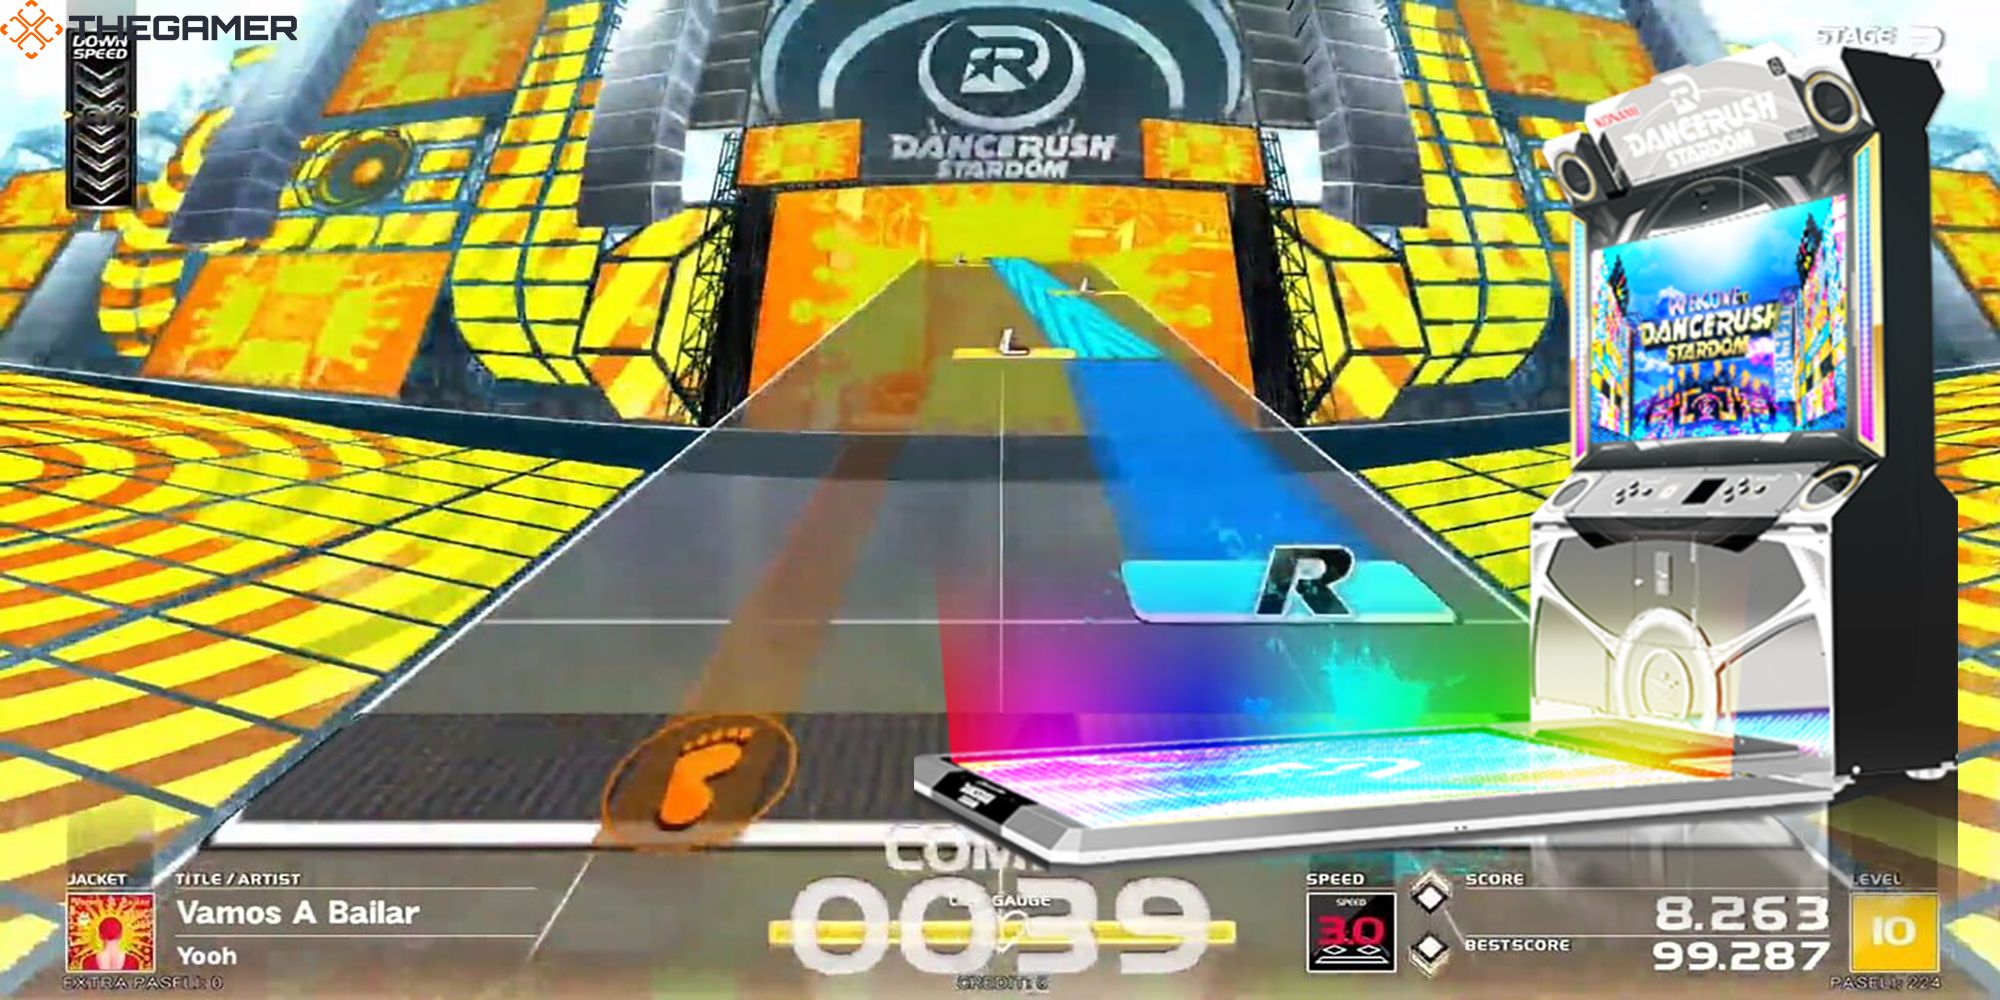 A DanceRush Stardom console lies in front of a roadway of streaming foot bars in a custom image displaying Dance Rush.